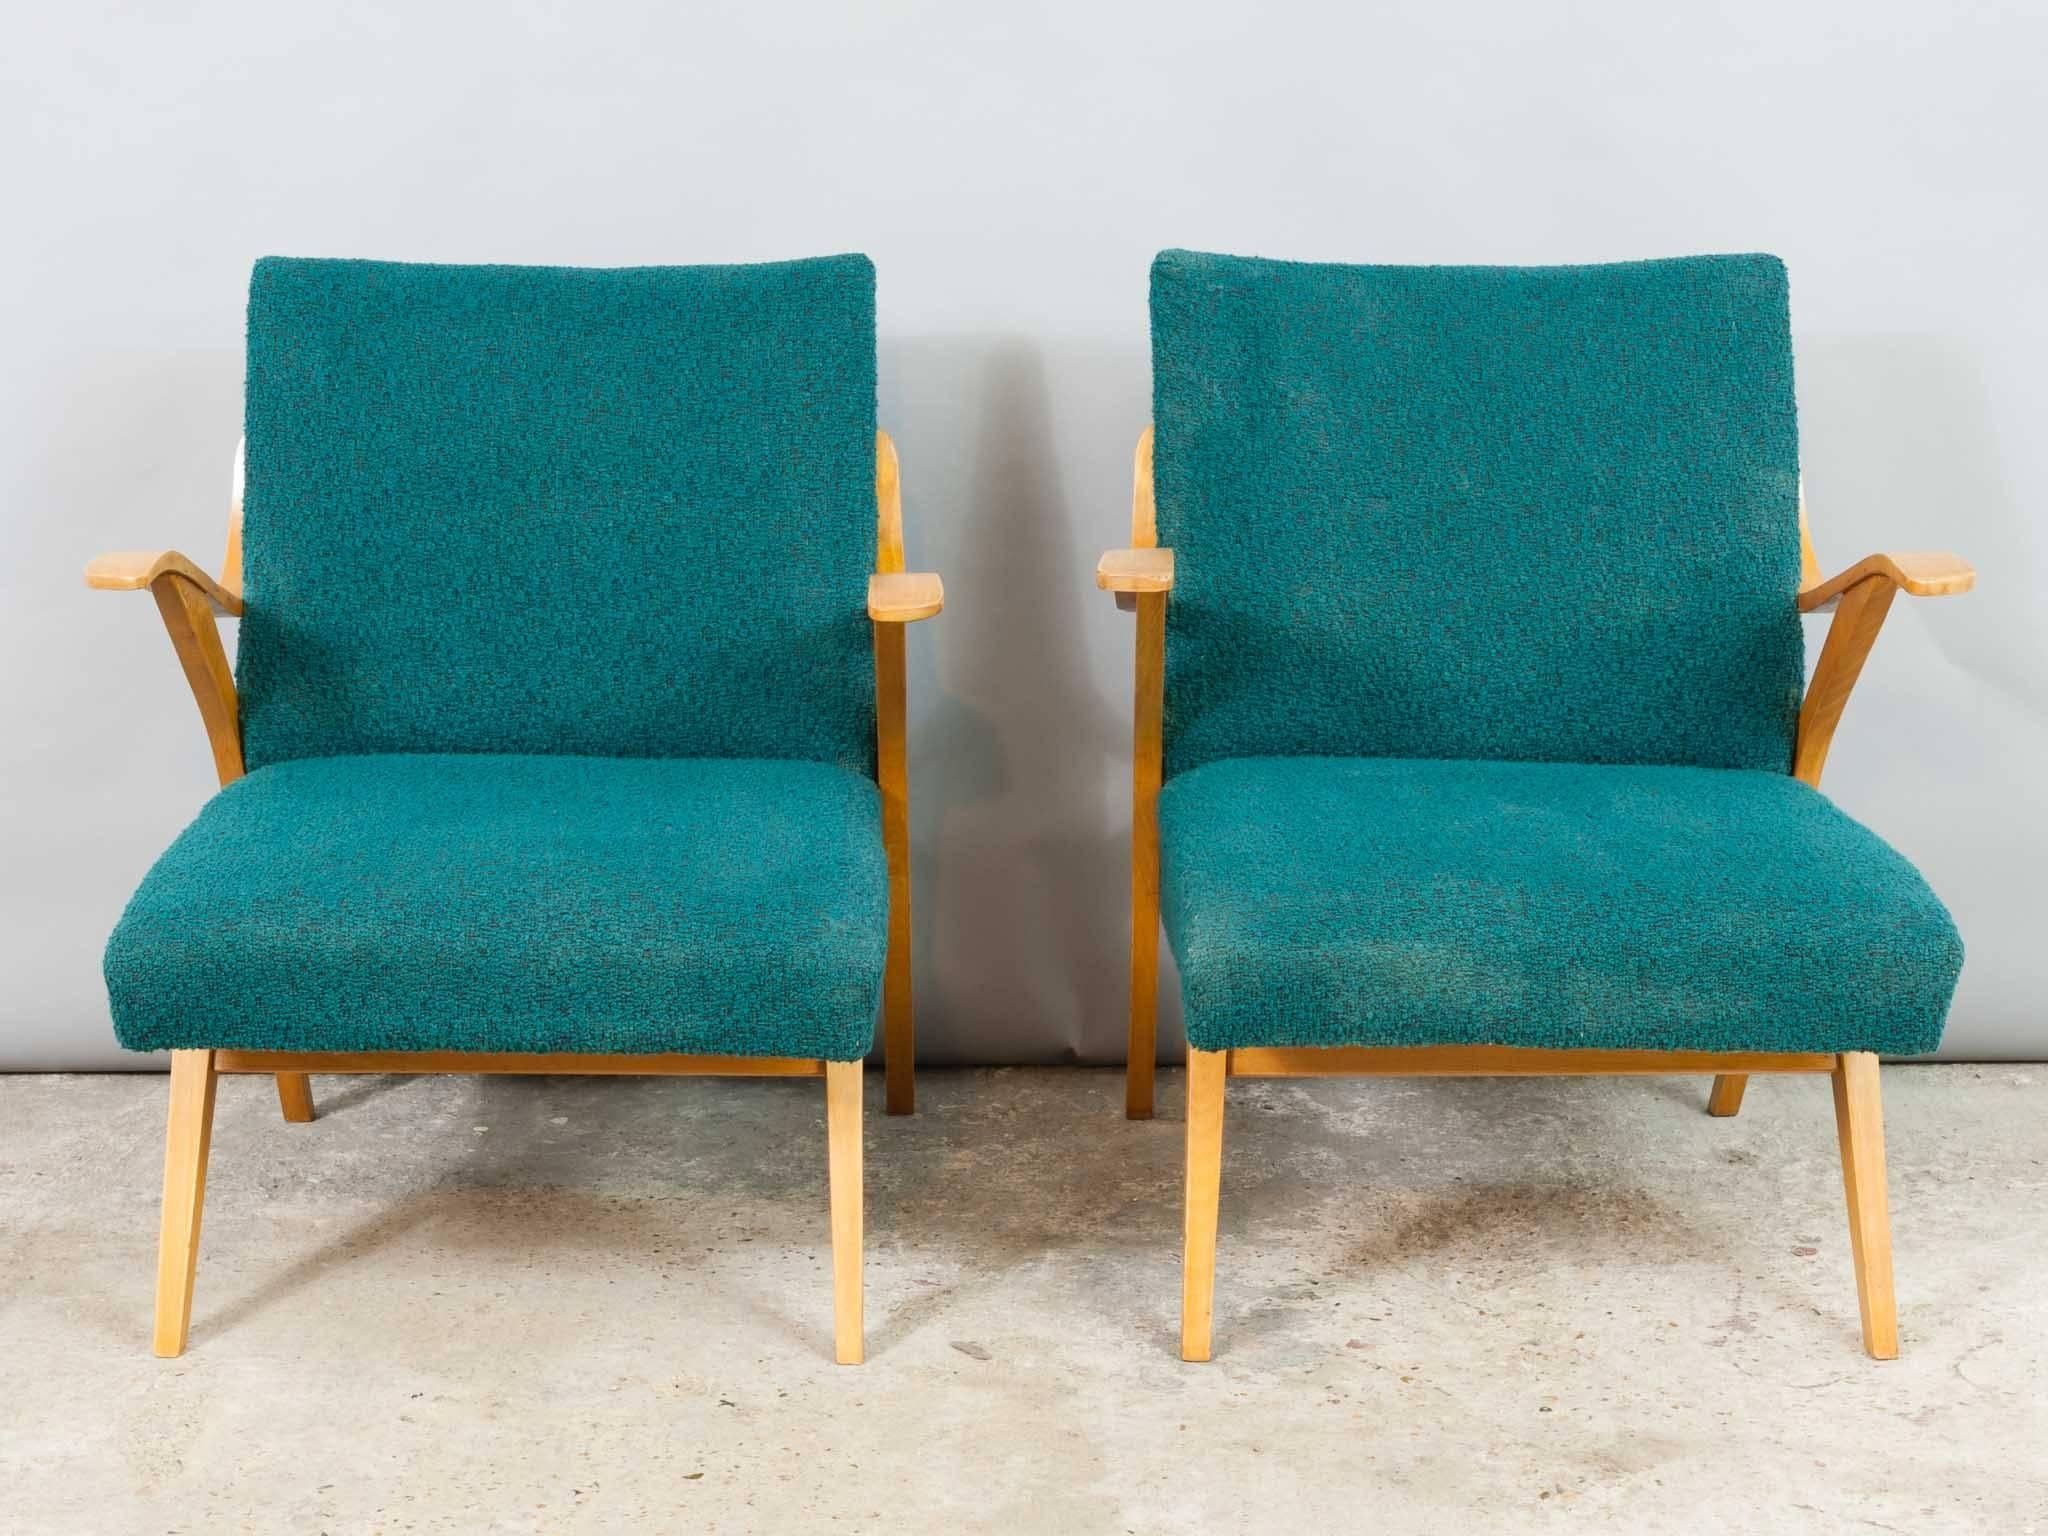 1960s Czech beech armchairs by Tatra Nabytok in their original teal fabric. The wooden parts of the chairs have been refinished and have a lovely polished patina. The original fabric does show some signs of wear commensurate to their age and past